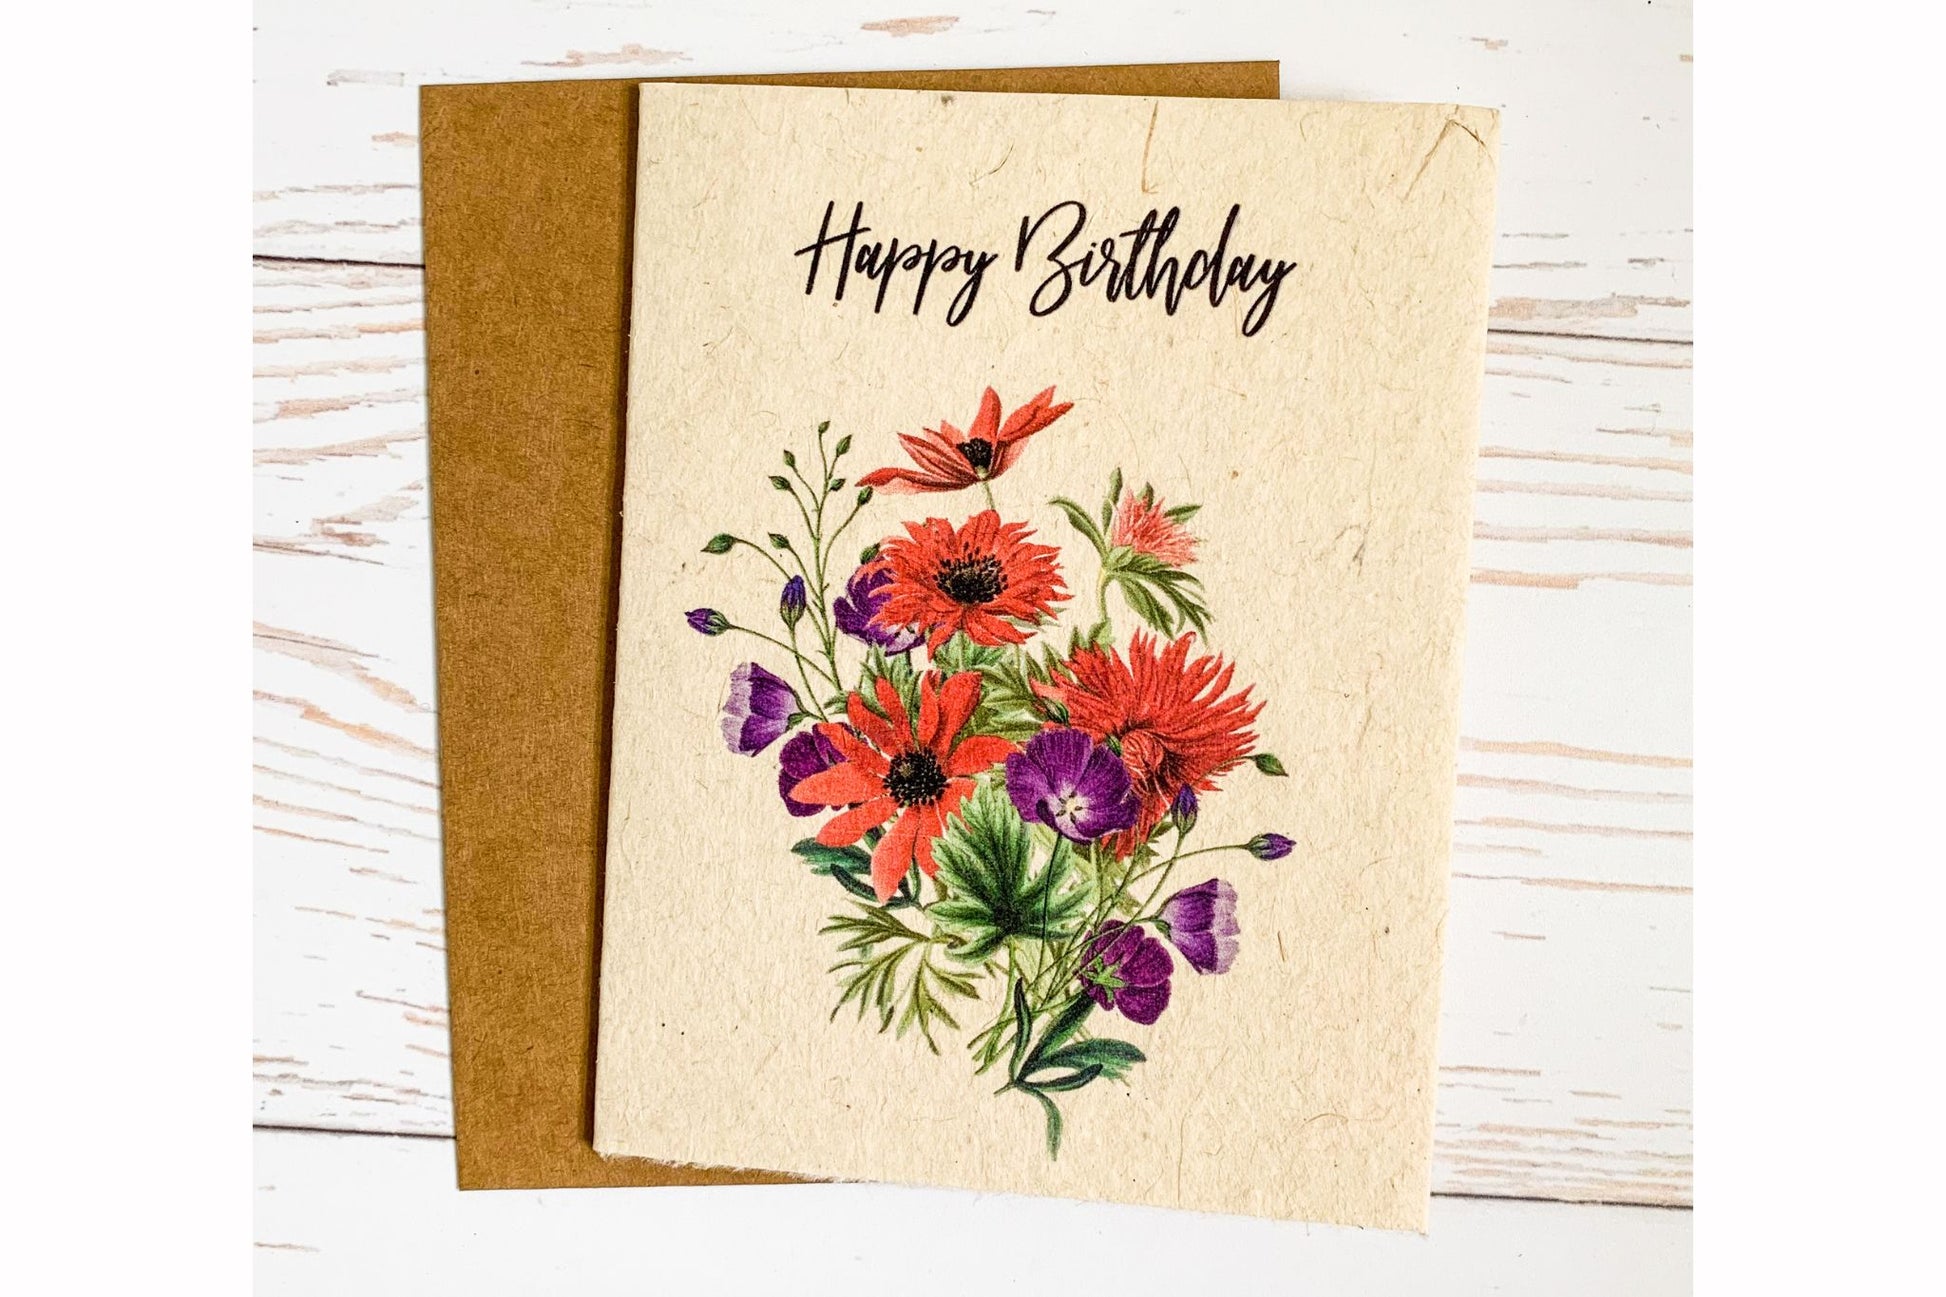 Plantable Flower Seed Paper Birthday Cards, Eco Friendly Cards, Wildflower Seed Paper, Zero Waste Botanical Cards, - Helen Jeanne 